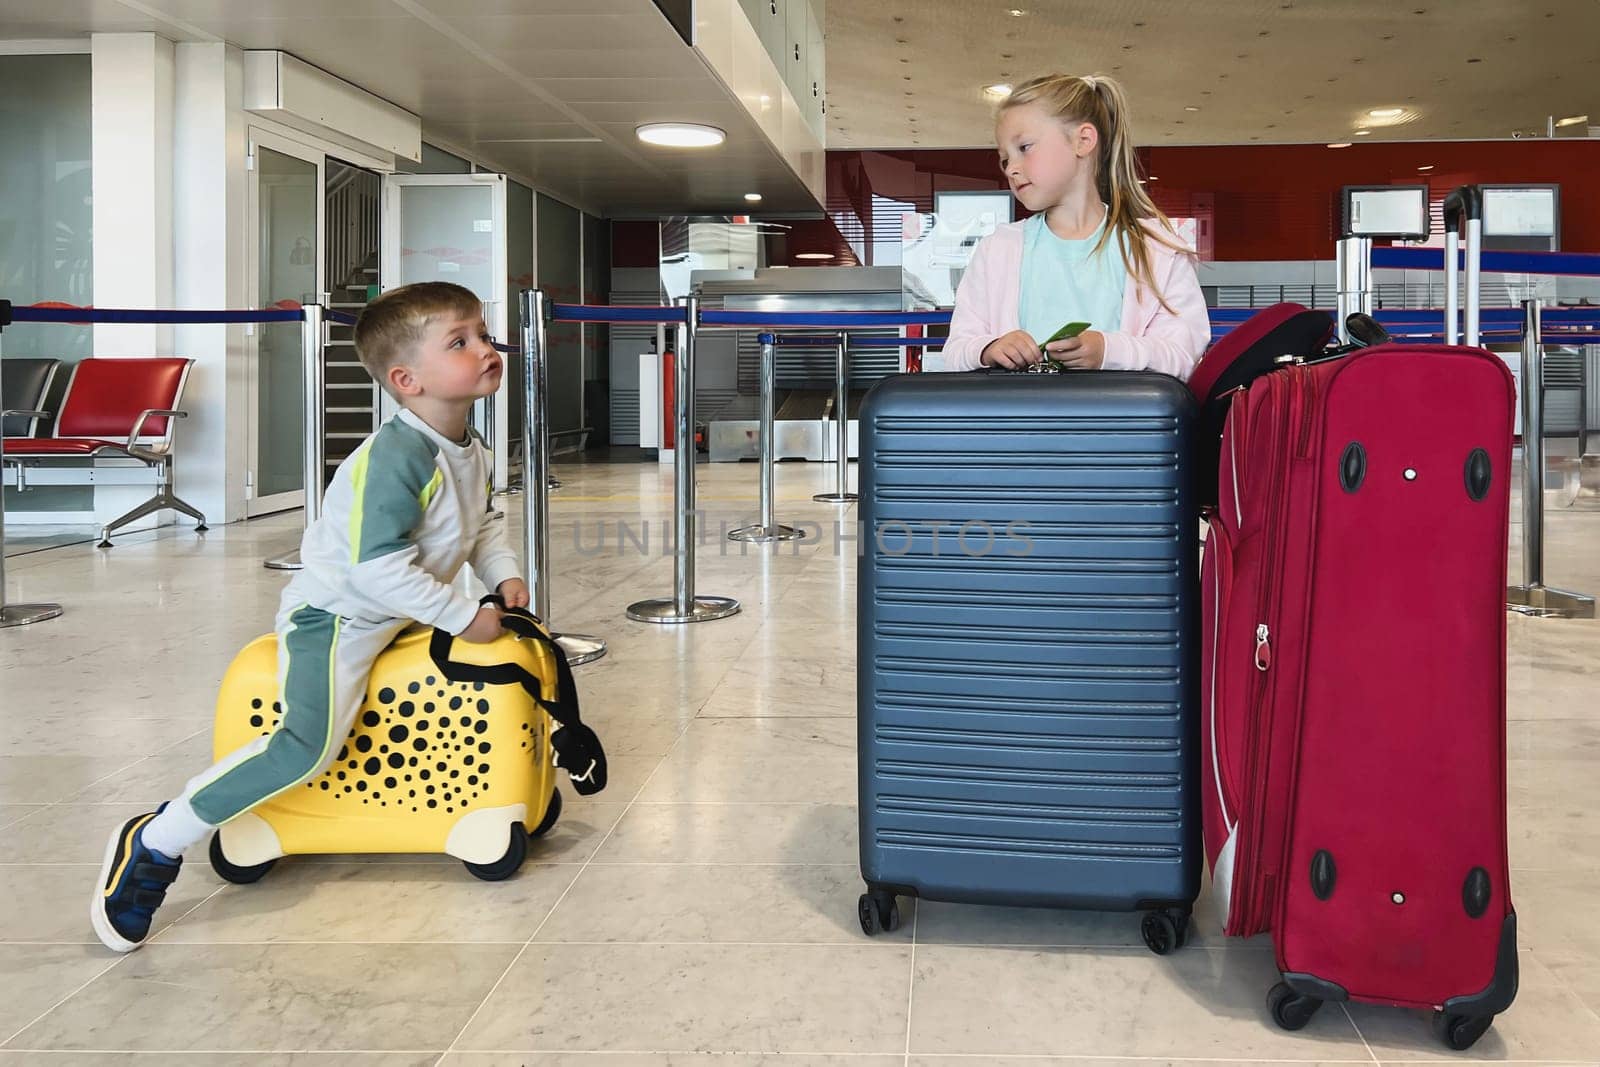 Children in the waiting room on suitcases flying to Paris by Godi